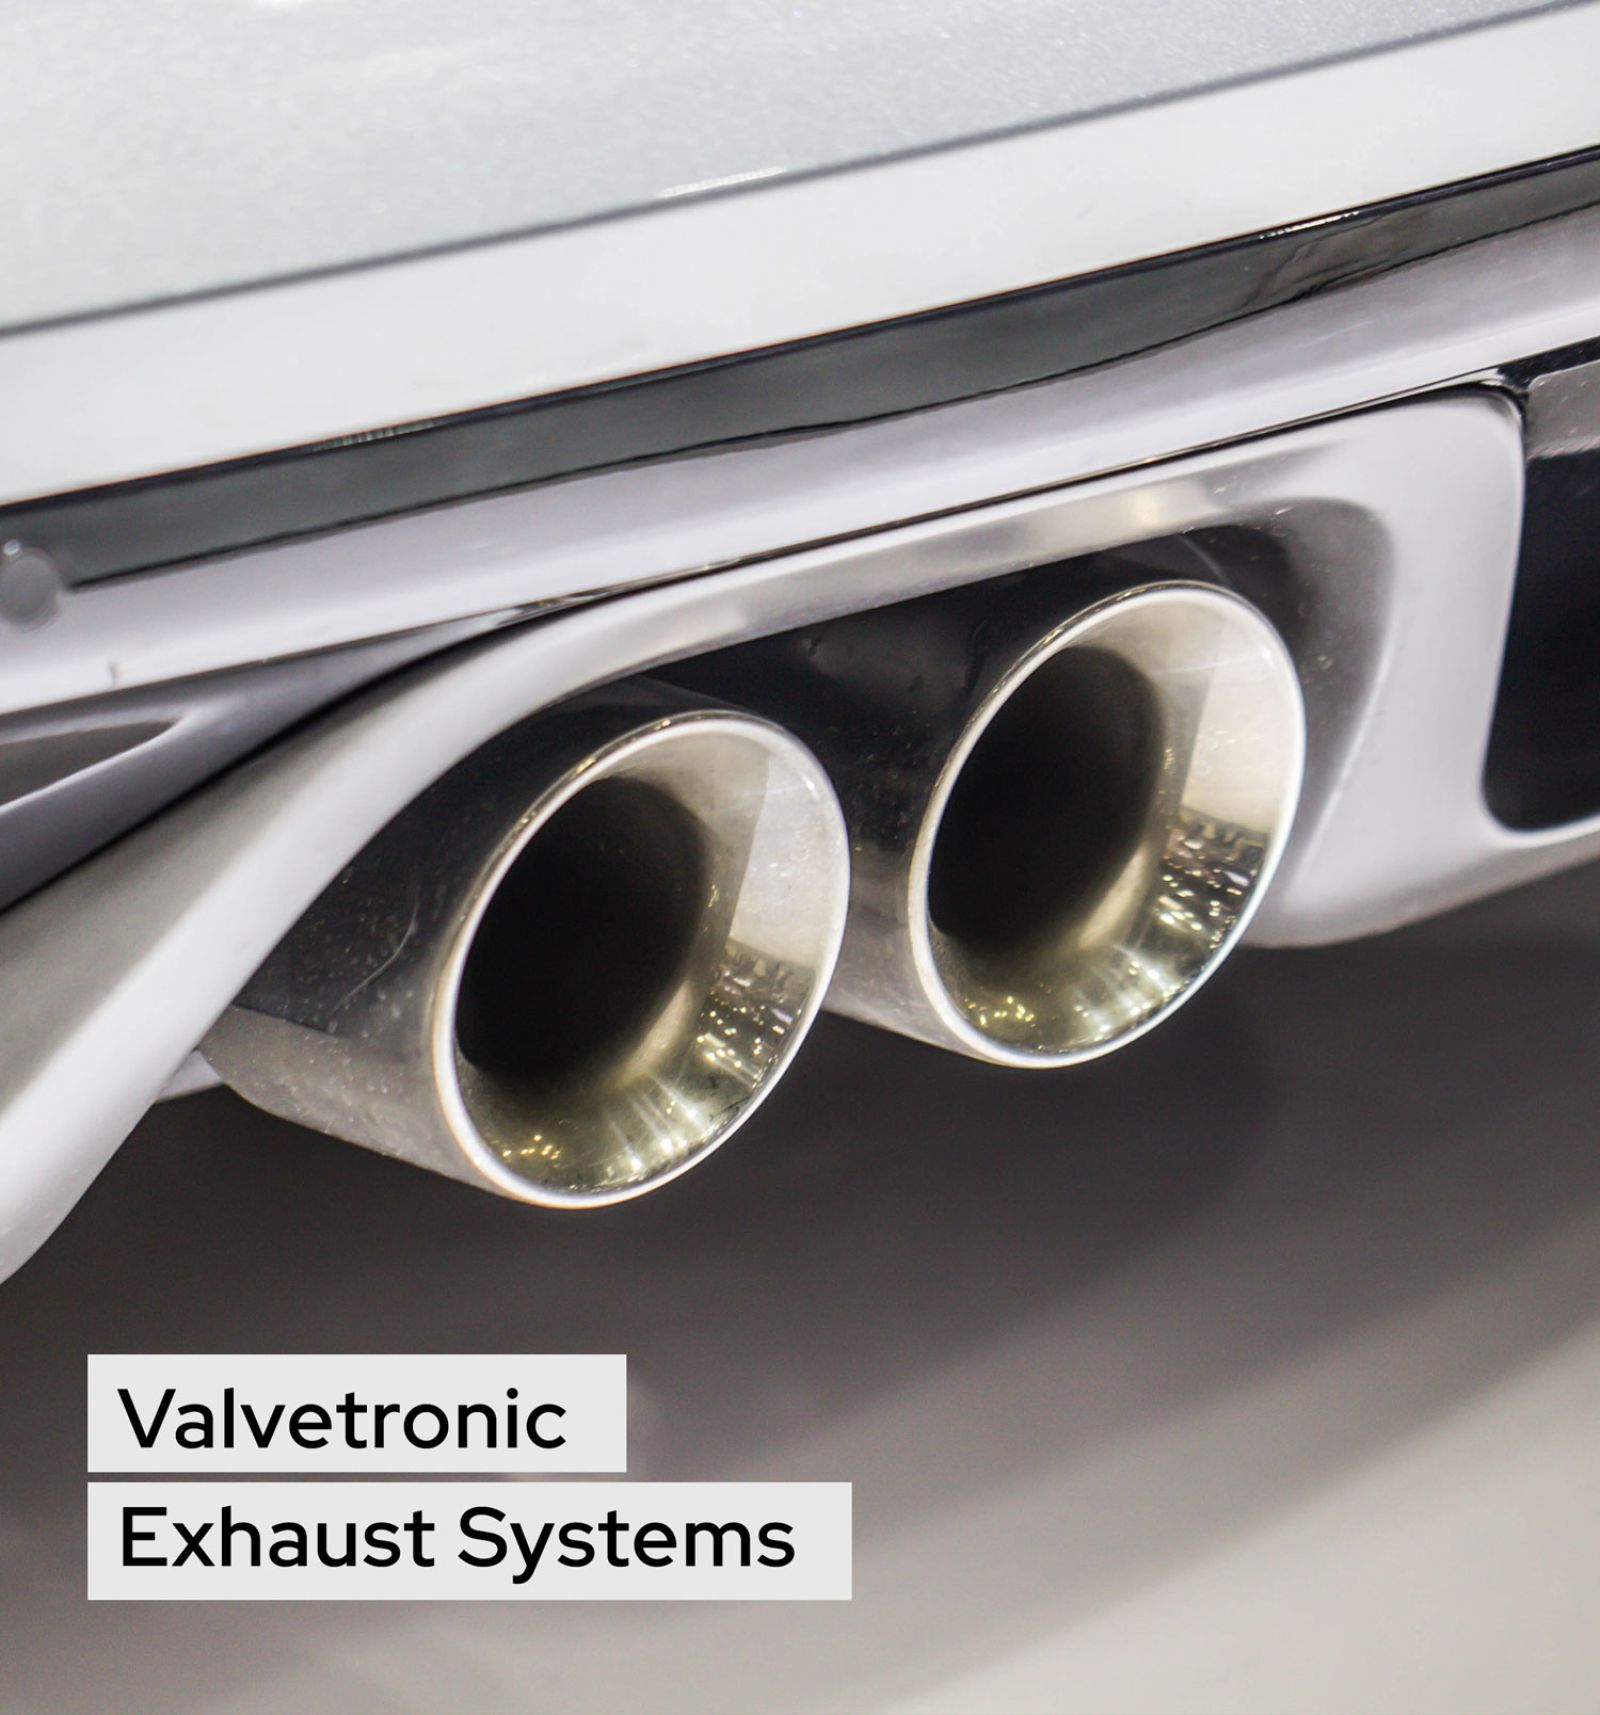 Valvetronic Exhaust Systems